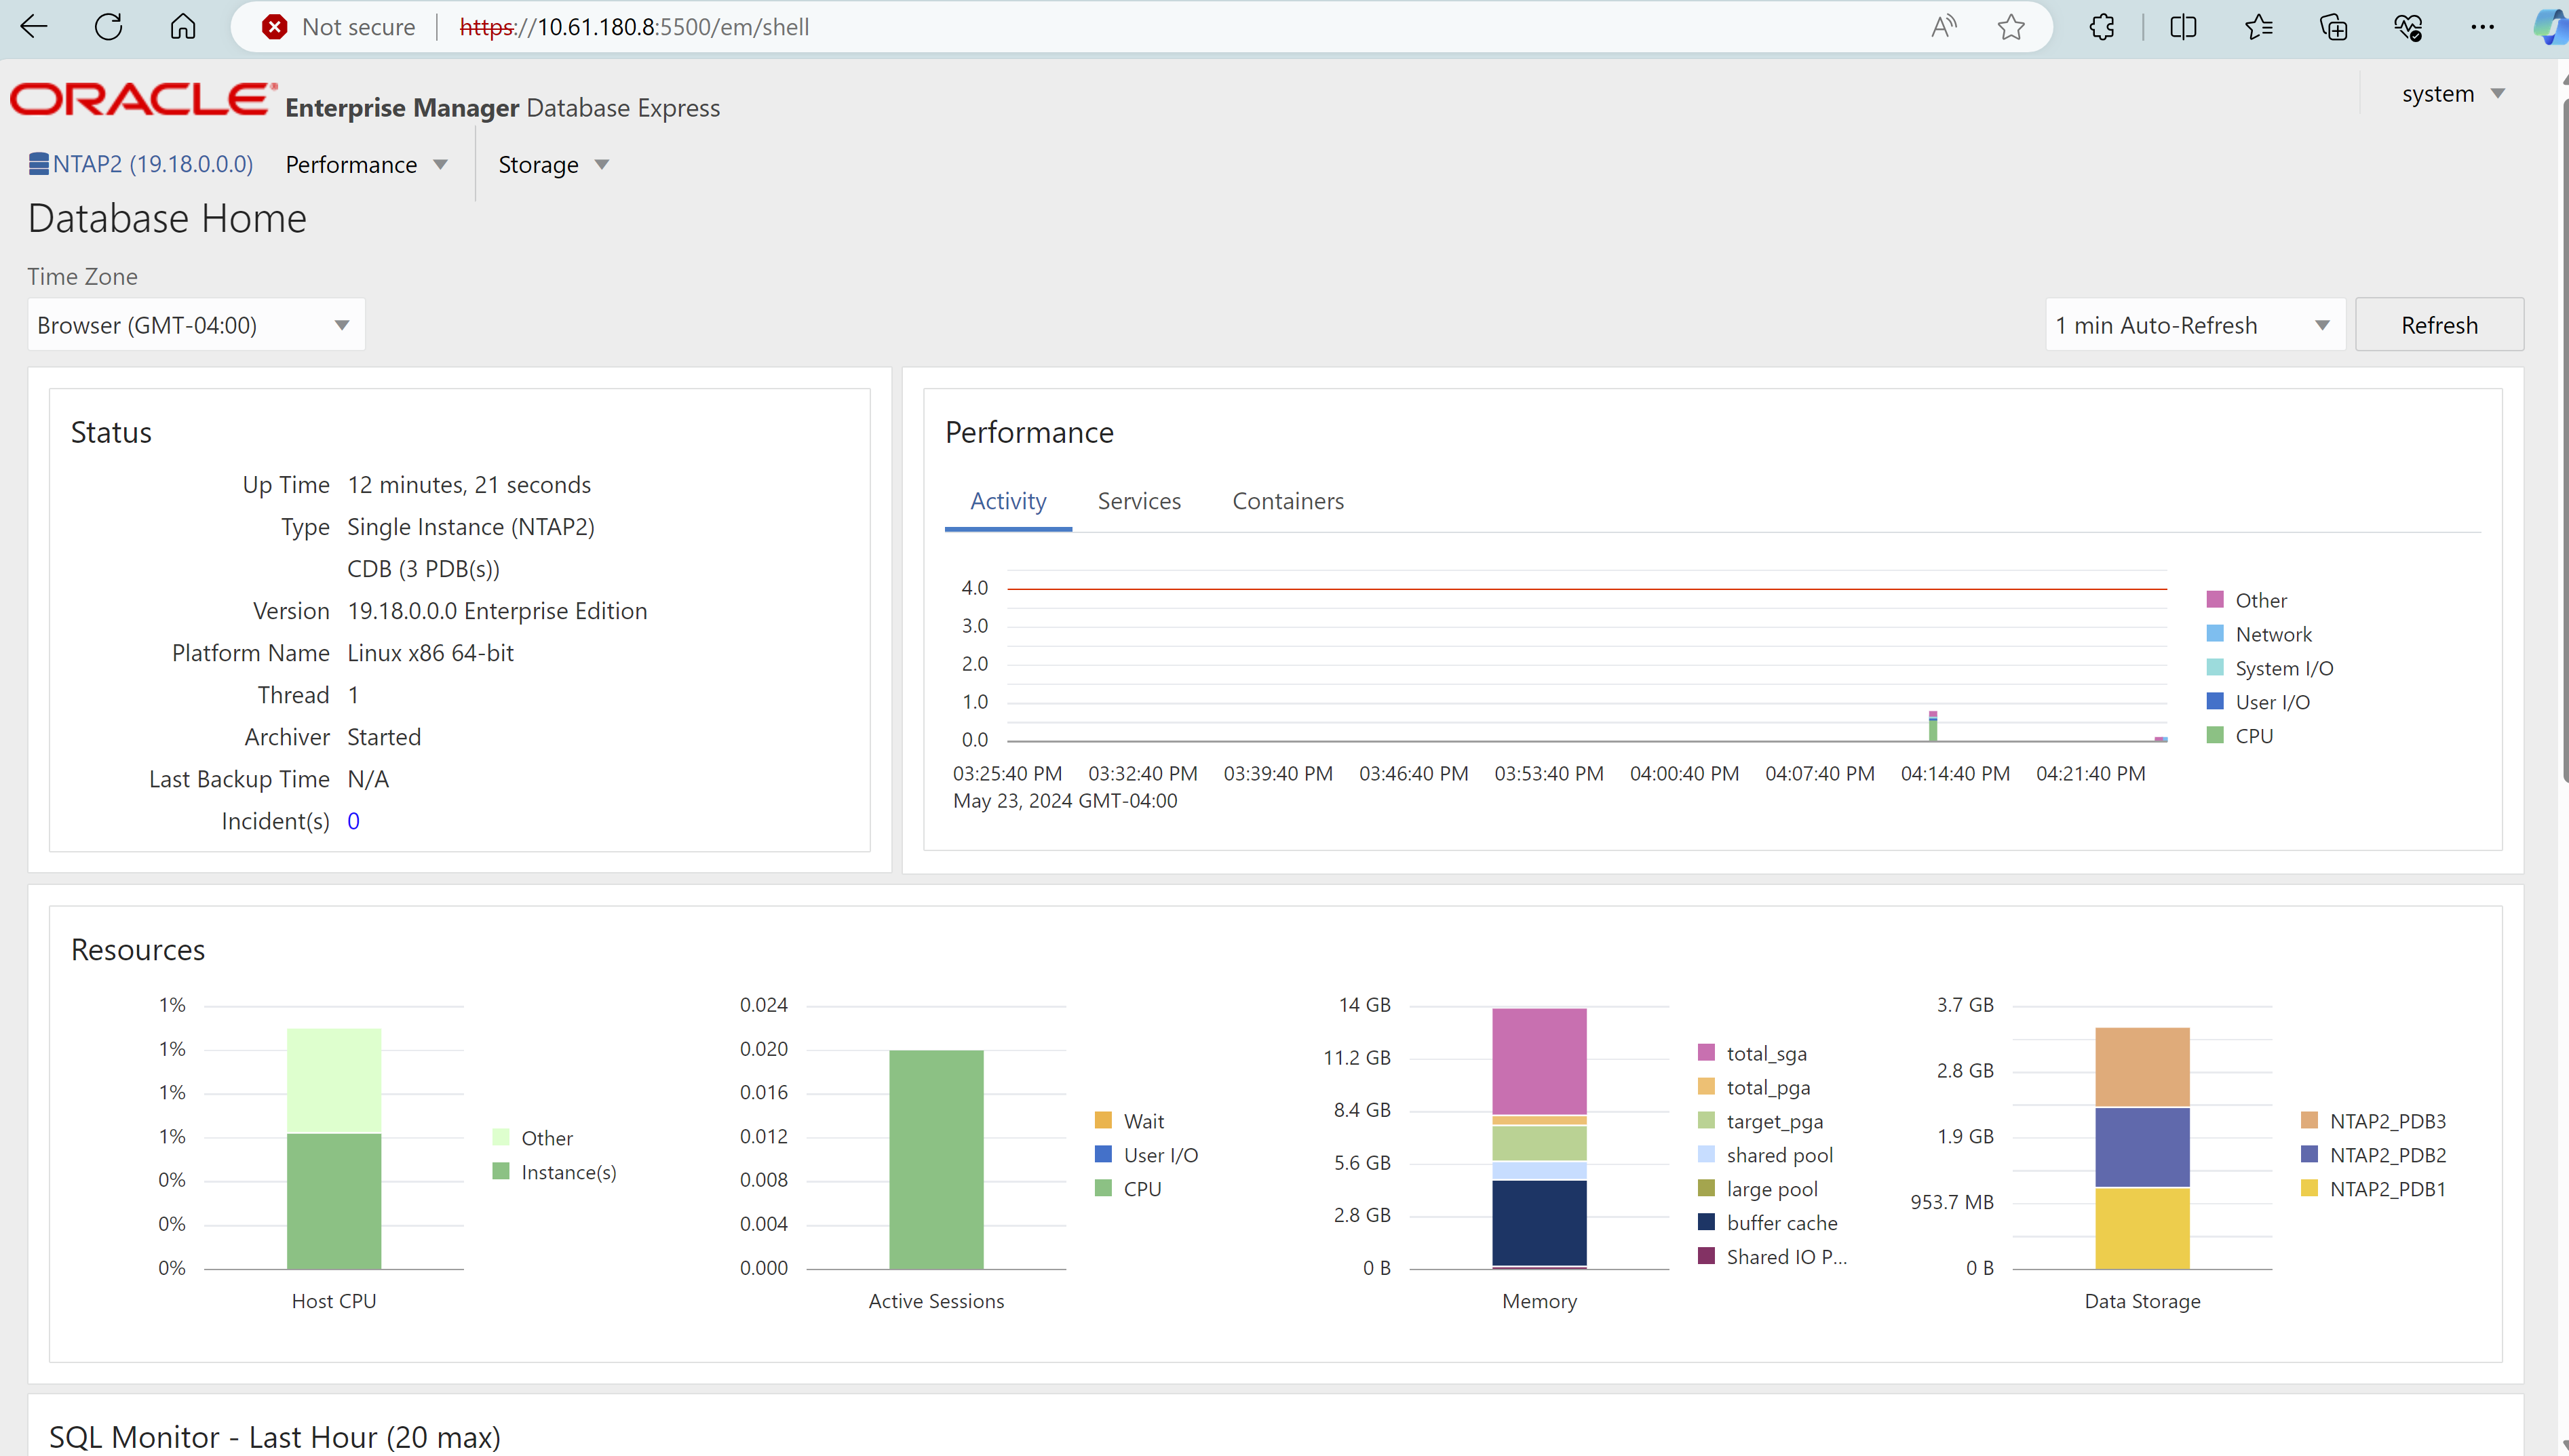 This image provides container database view from Oracle Enterprise Manager Express